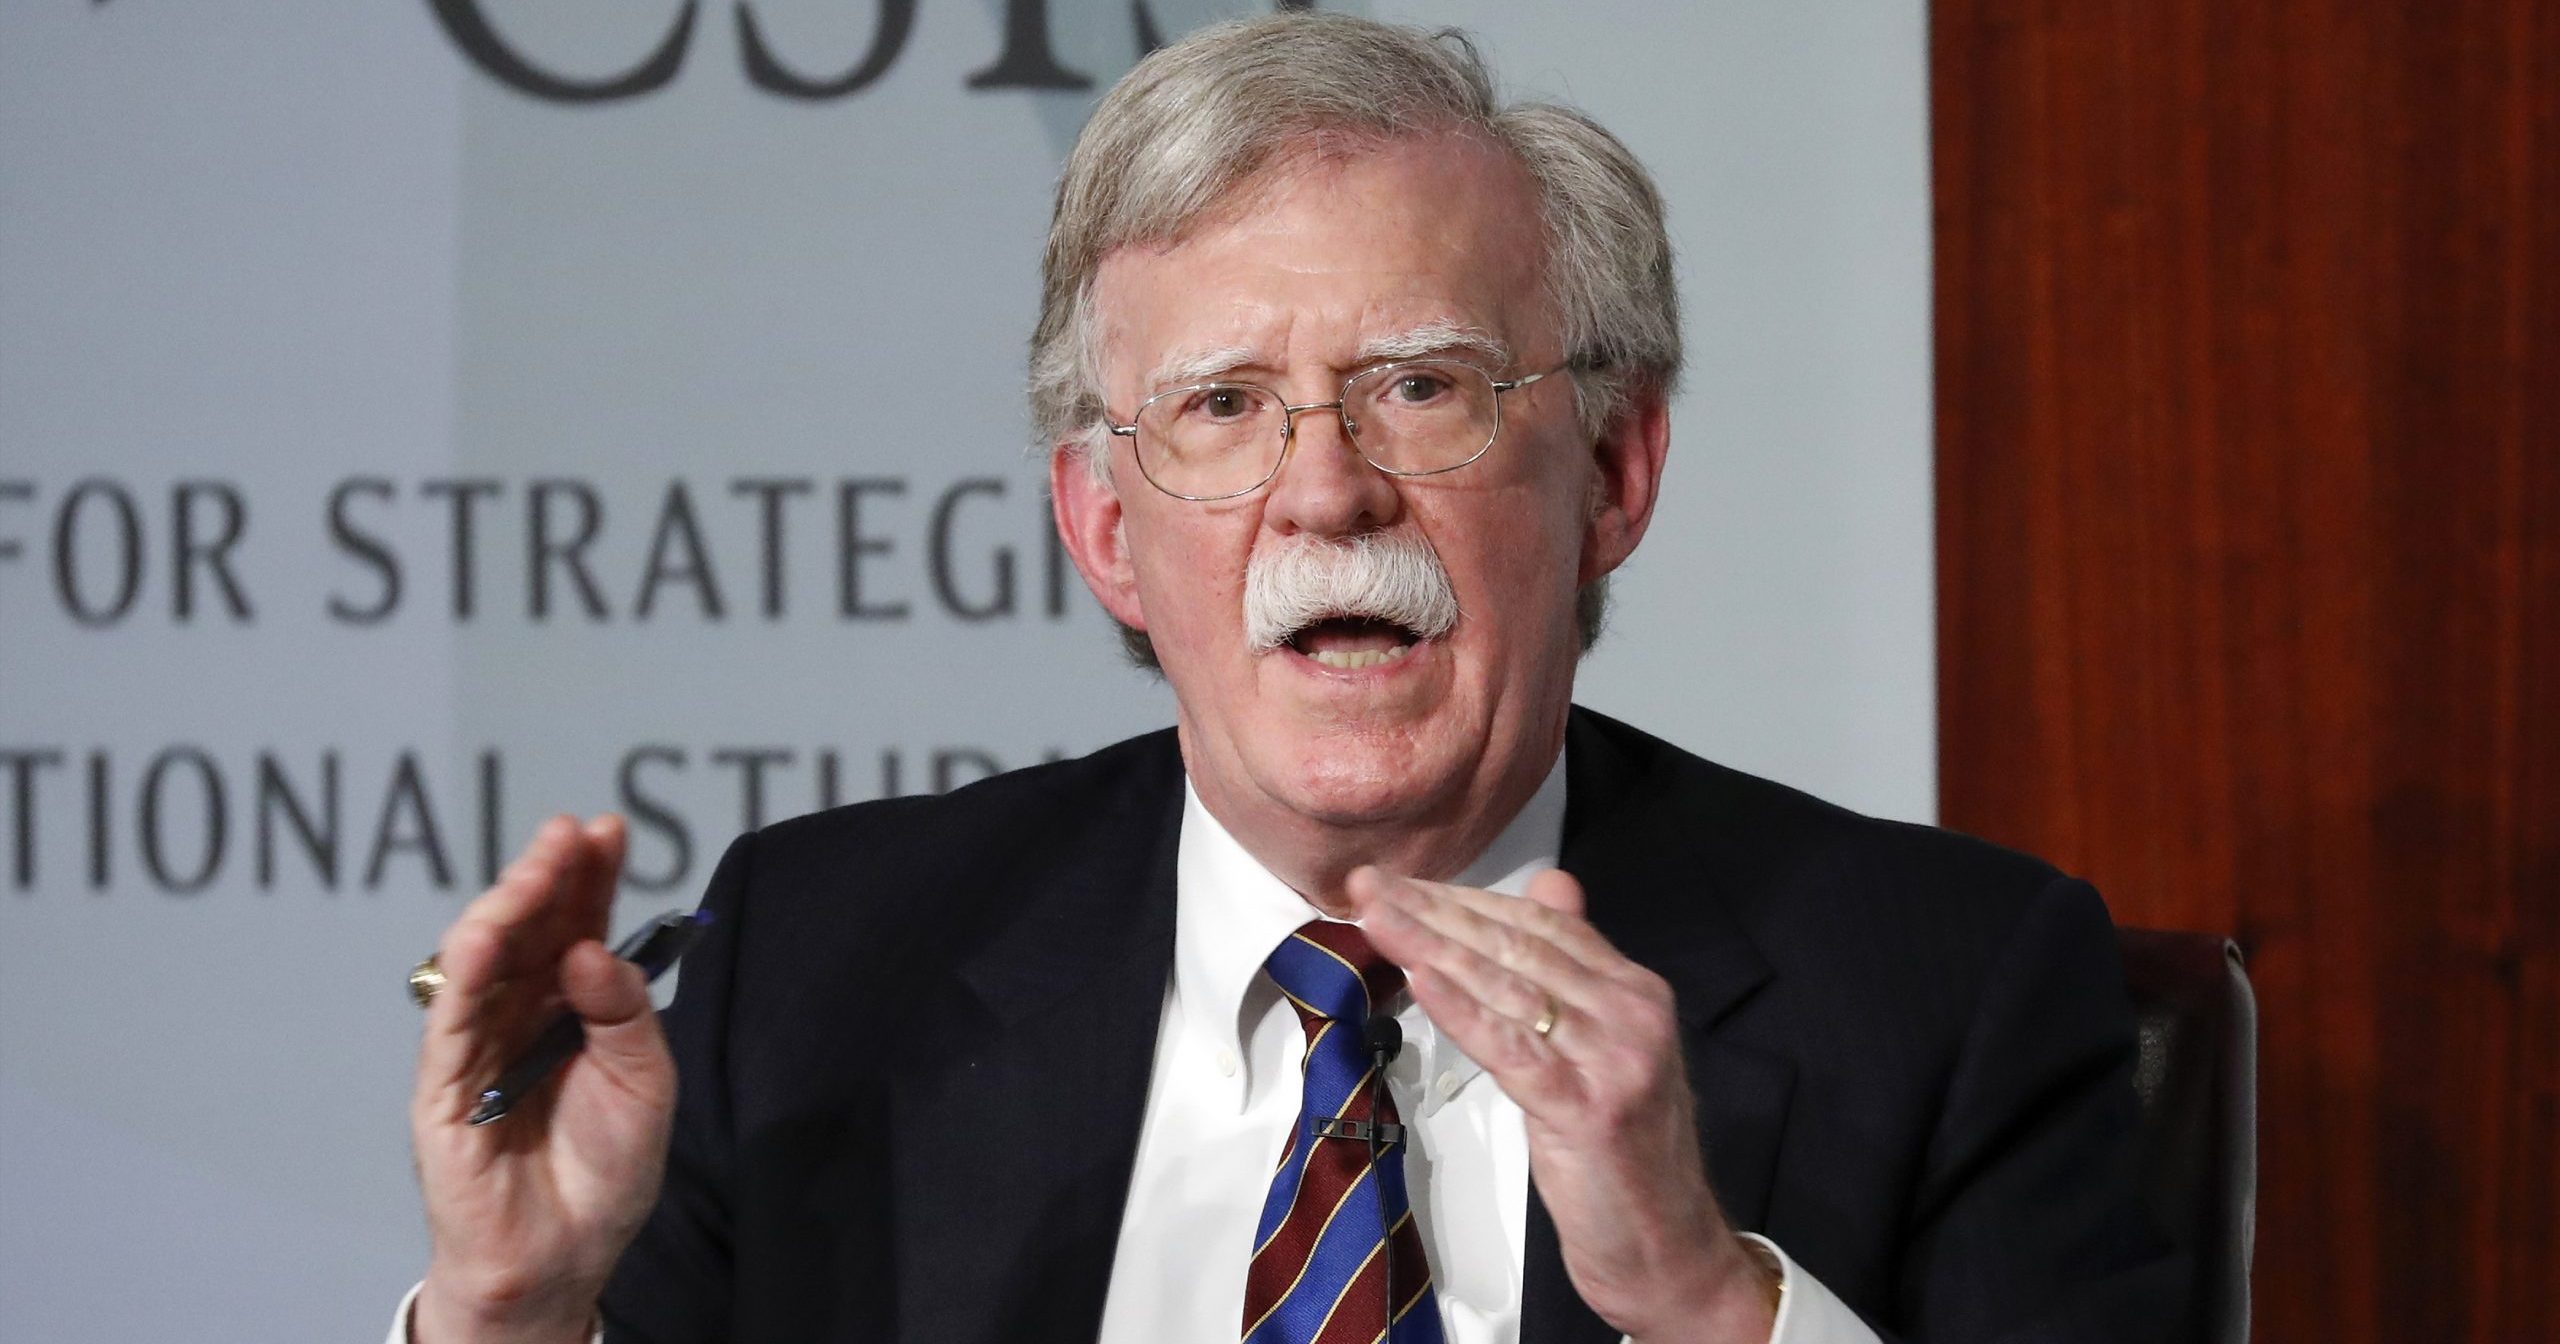 In this Sept. 30, 2019, file photo, former national security adviser John Bolton speaks at the Center for Strategic and International Studies in Washington, D.C.